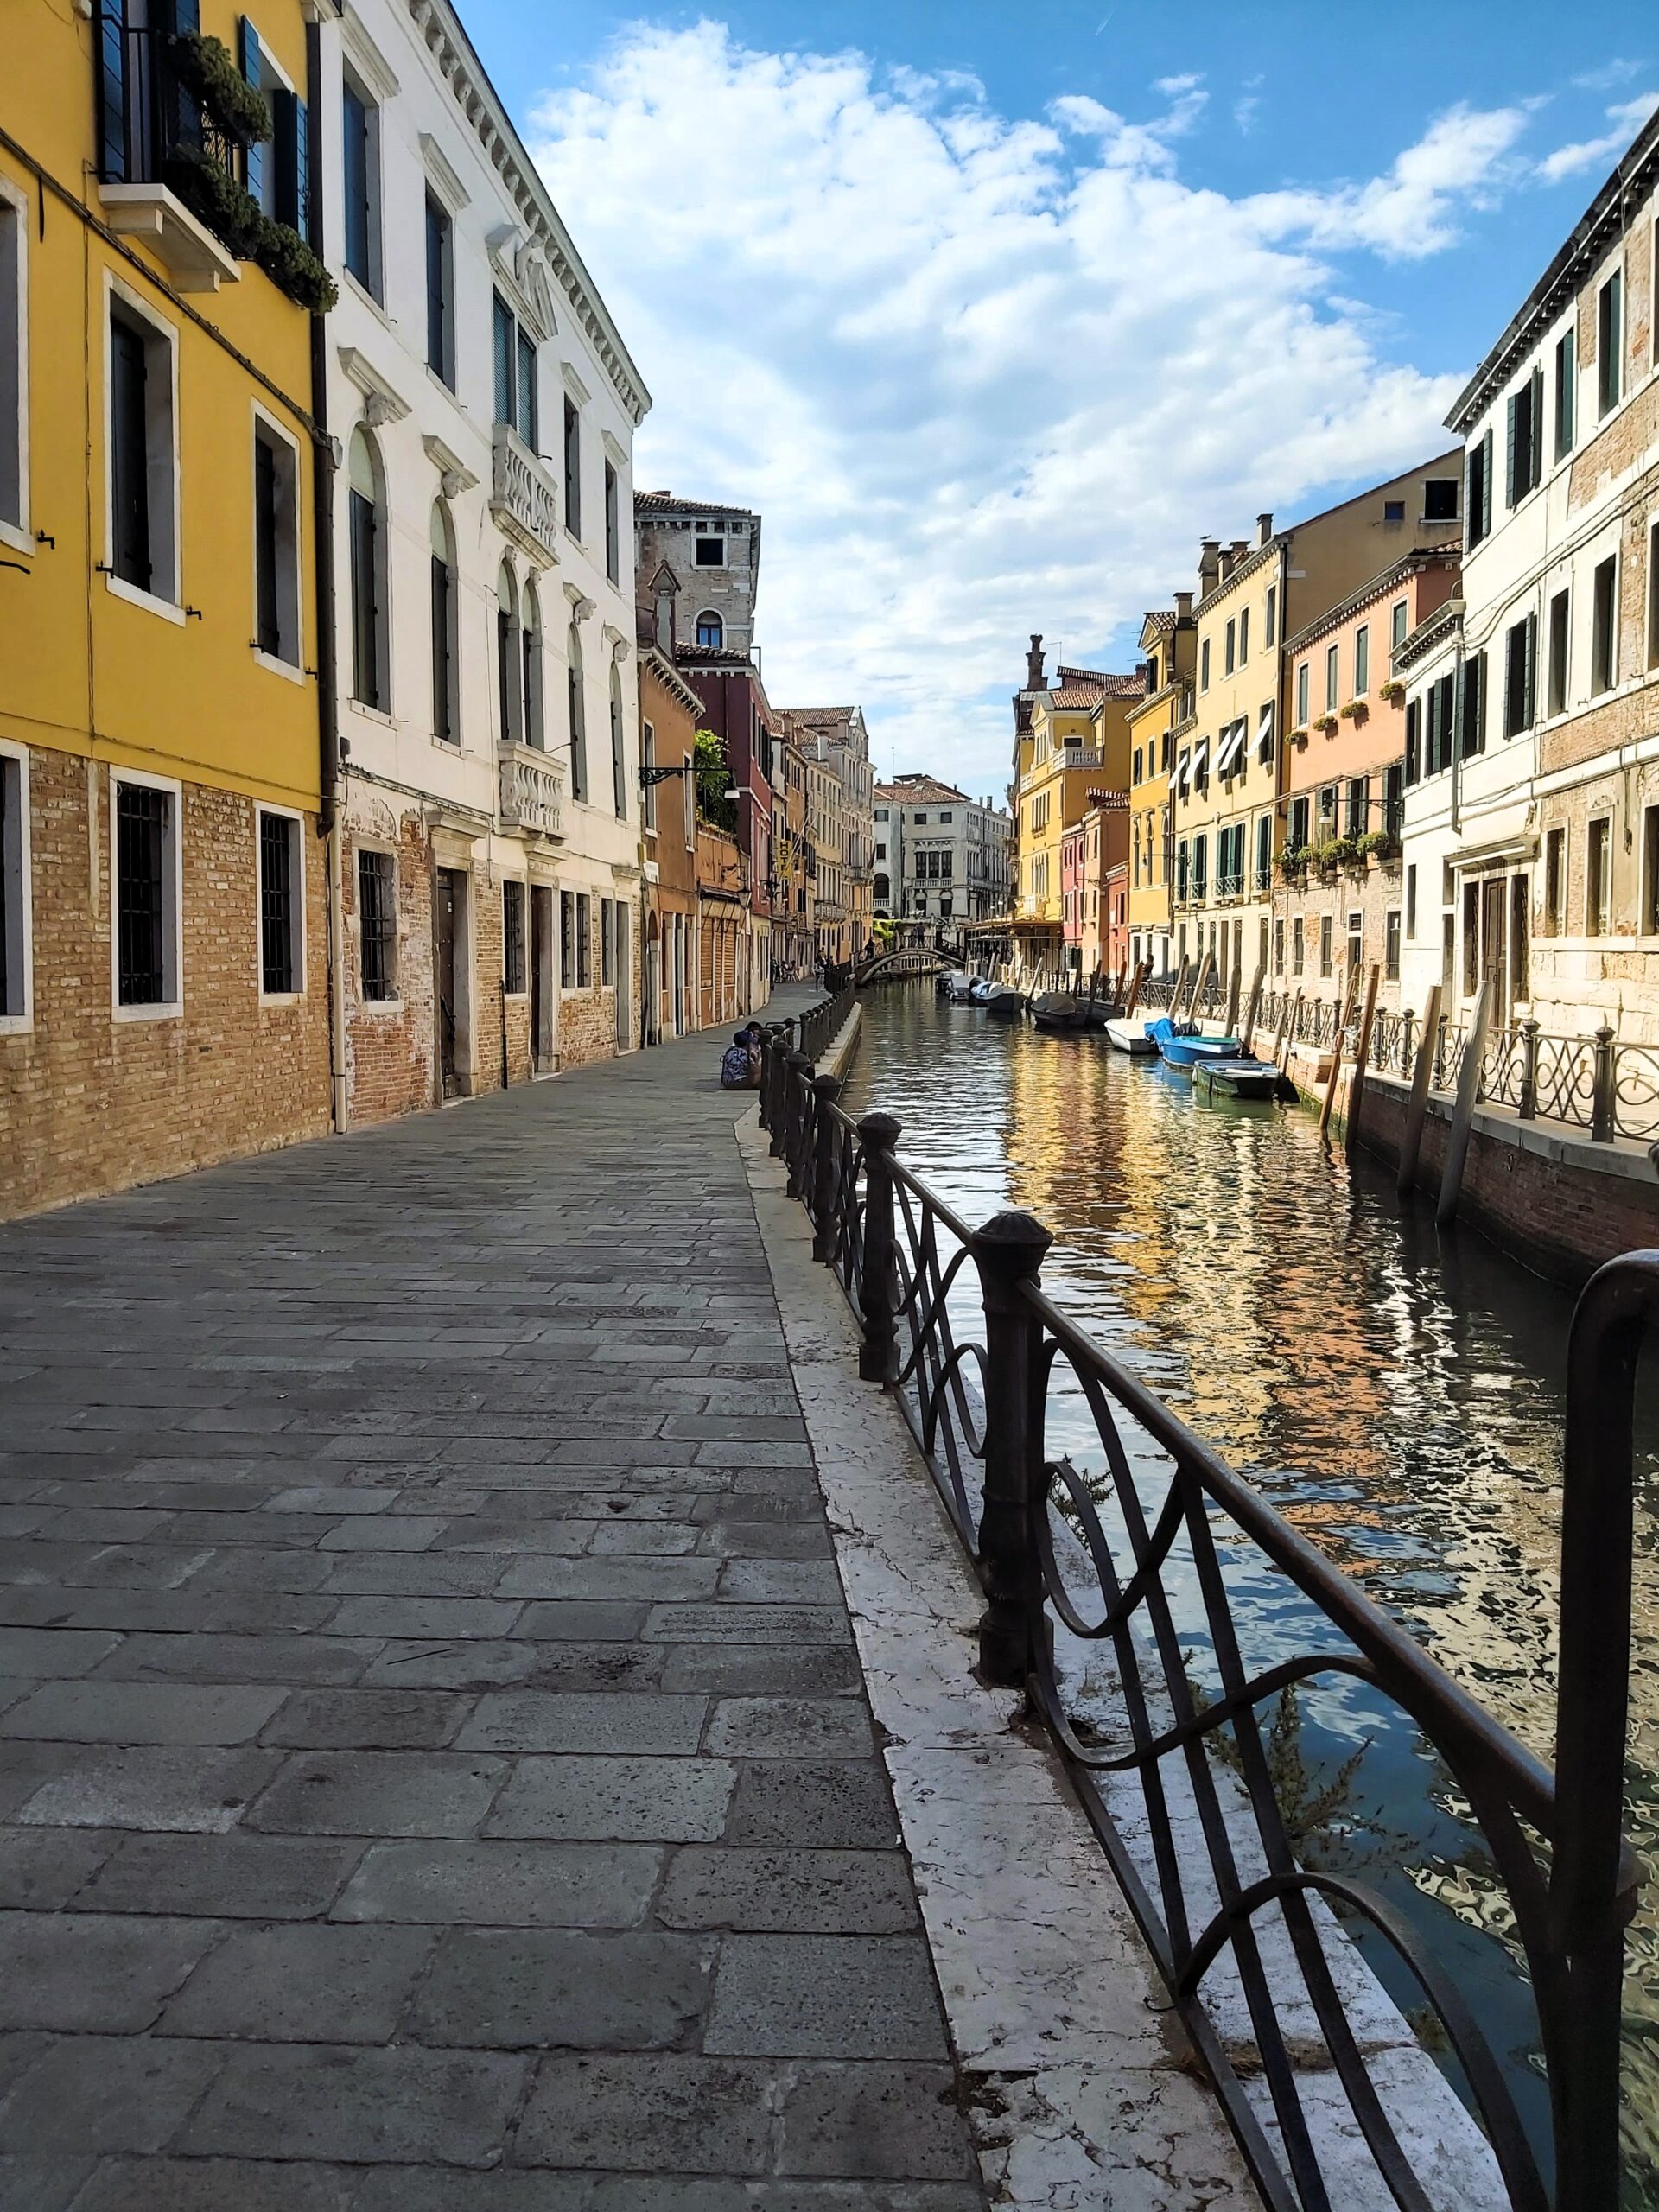 A paved street view alongside a canal with colourful houses in Venice, Italy